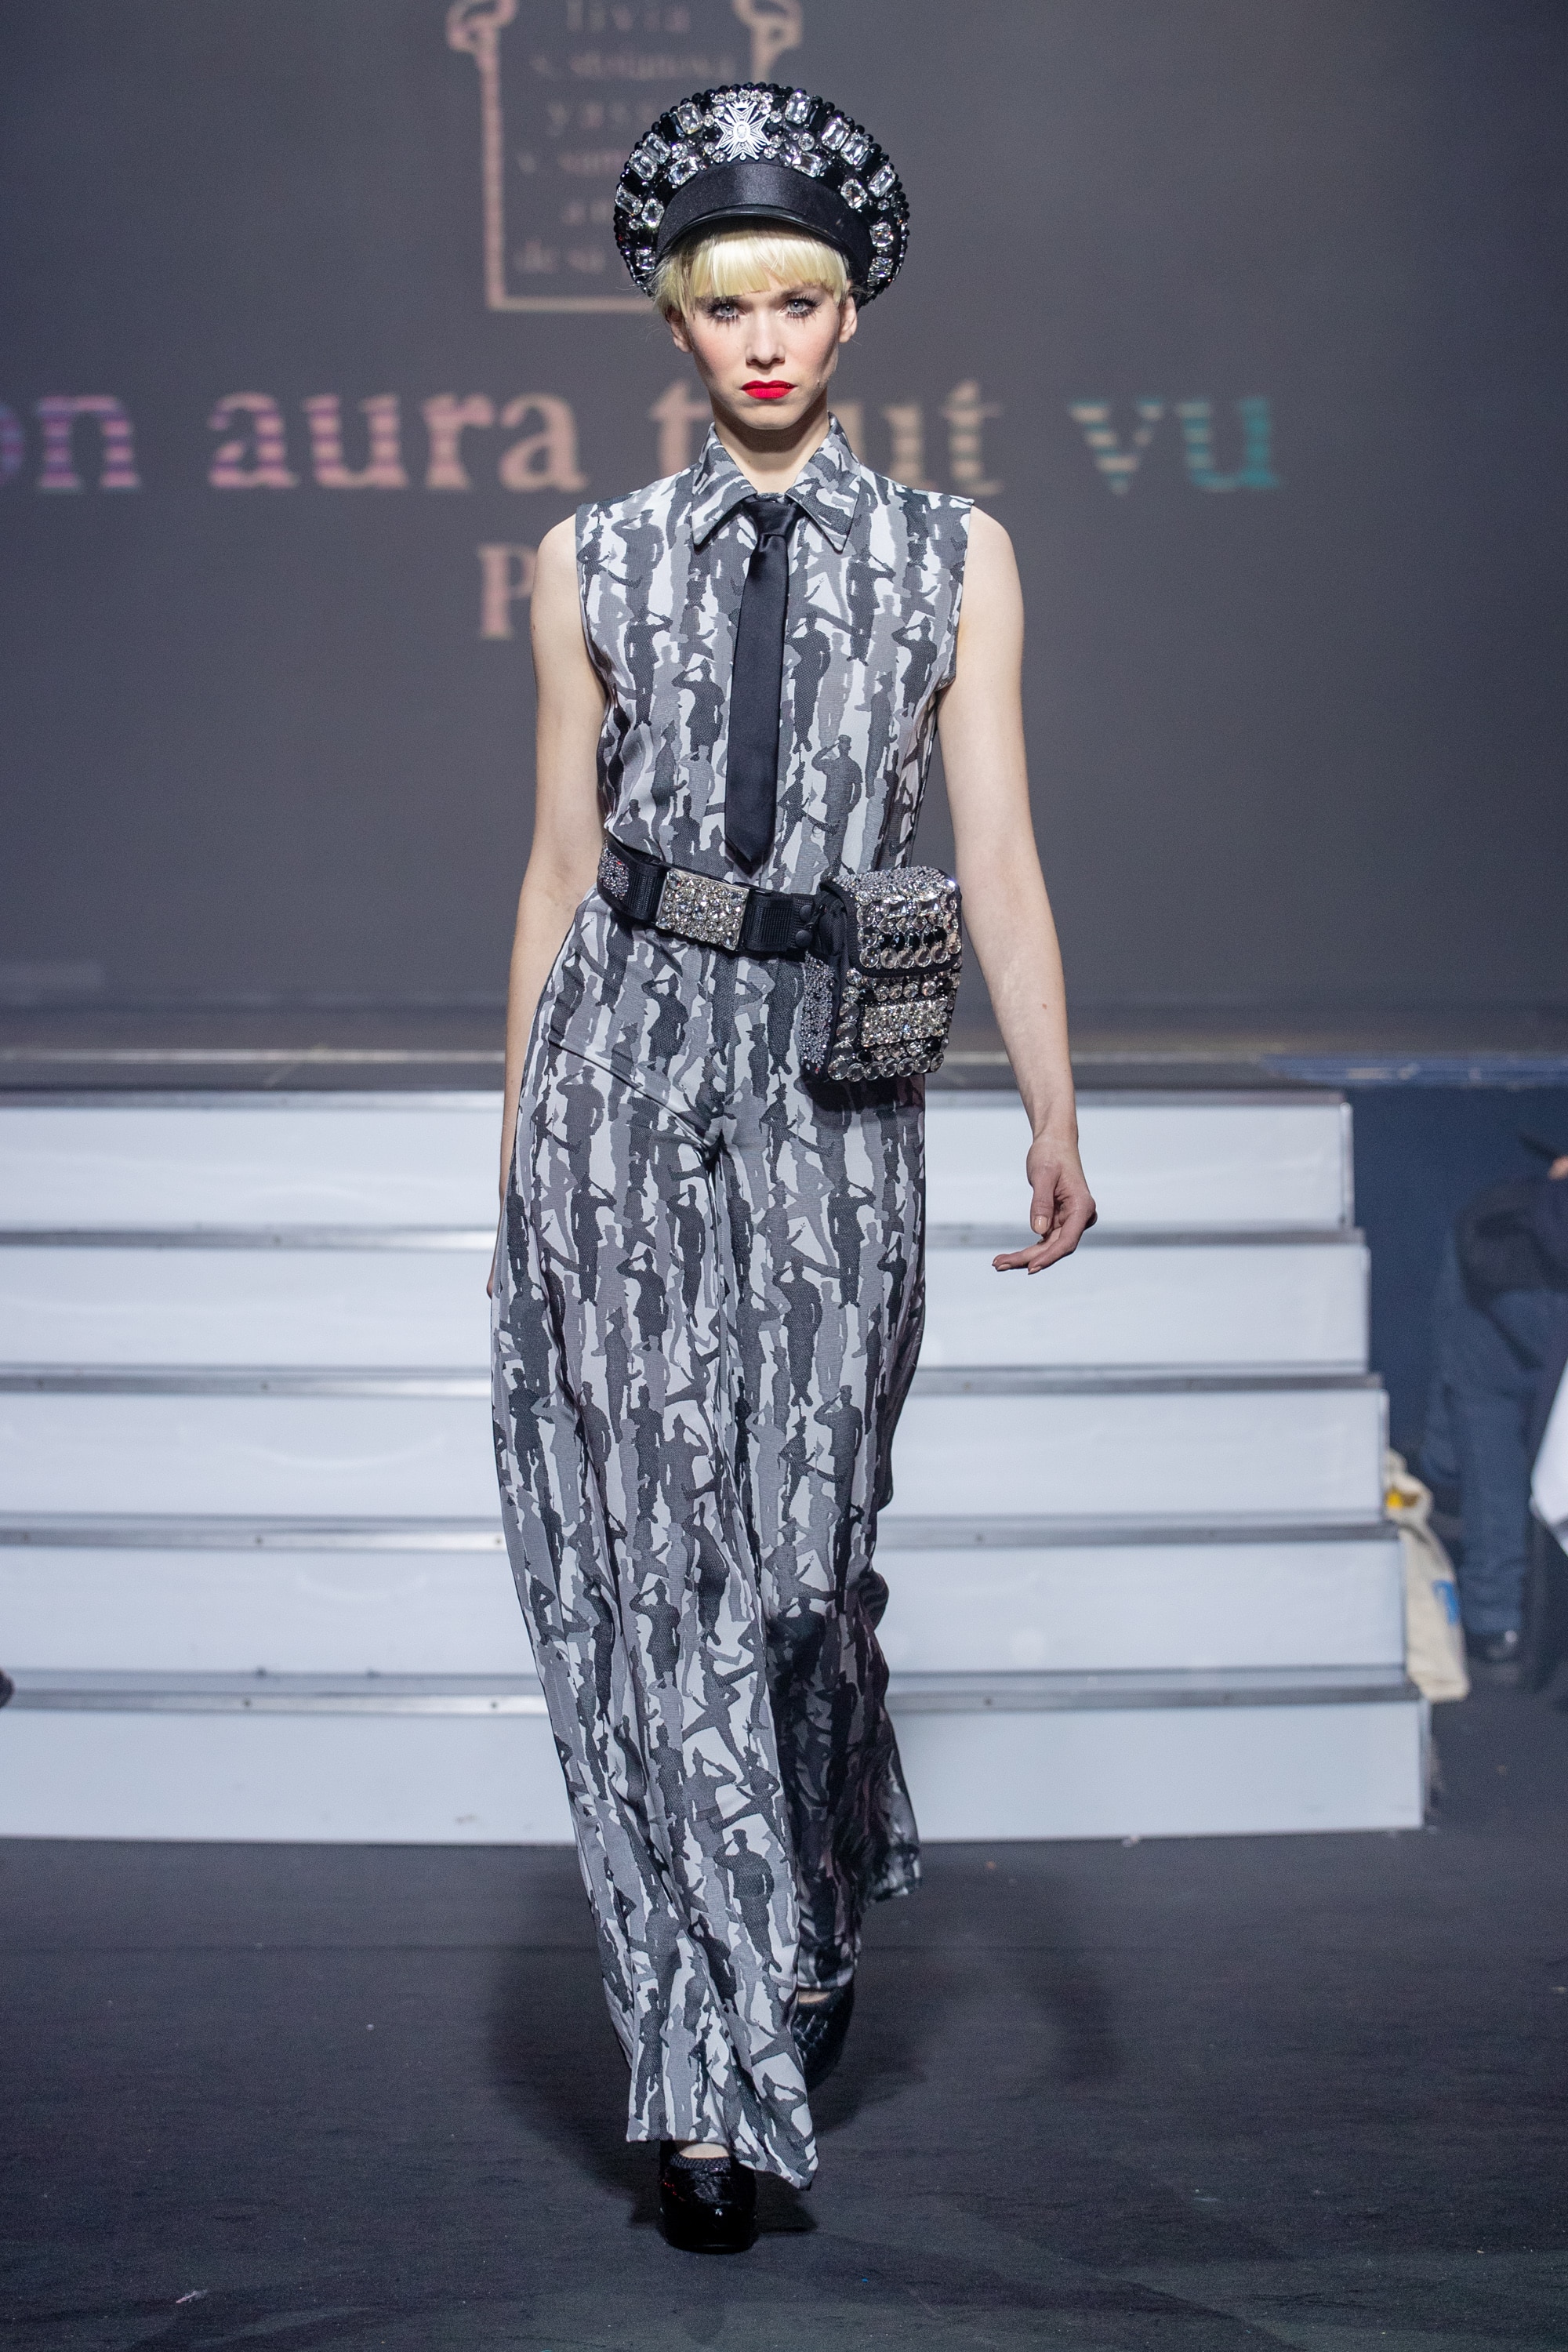 a model wearing Military silver silk  outfit  crystal hat and belt  by on aura tout vu haute couture spring summer 2020